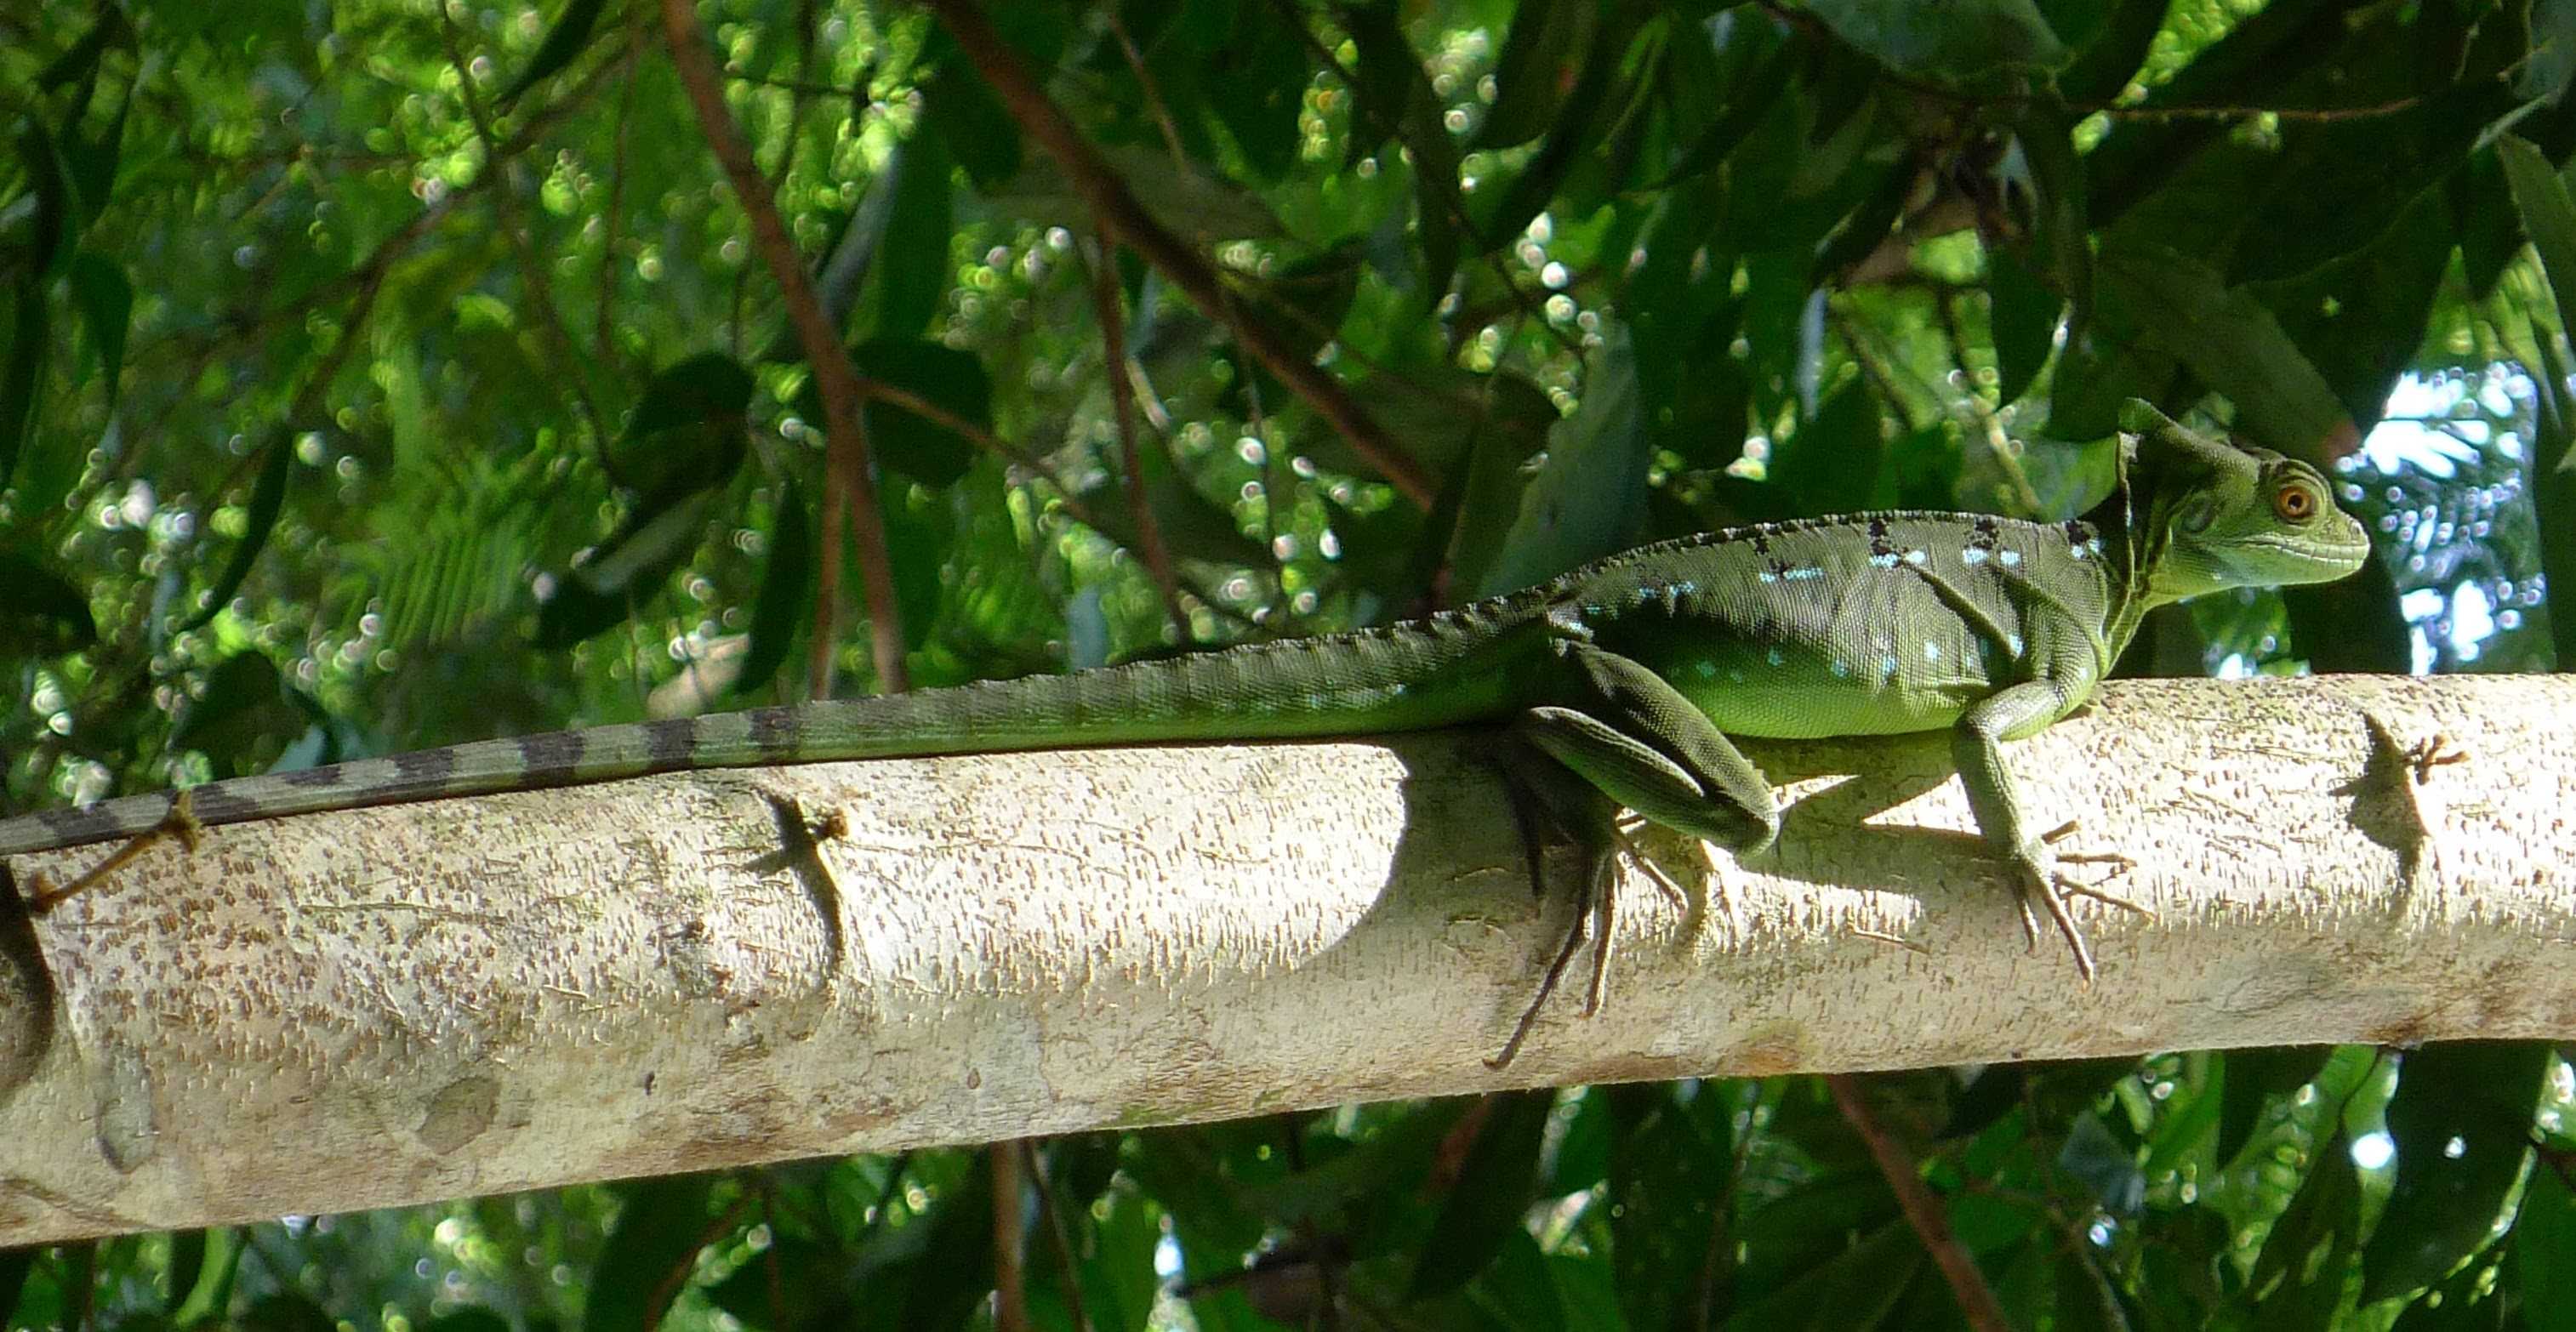 A basilisk standing on the branch of a tree